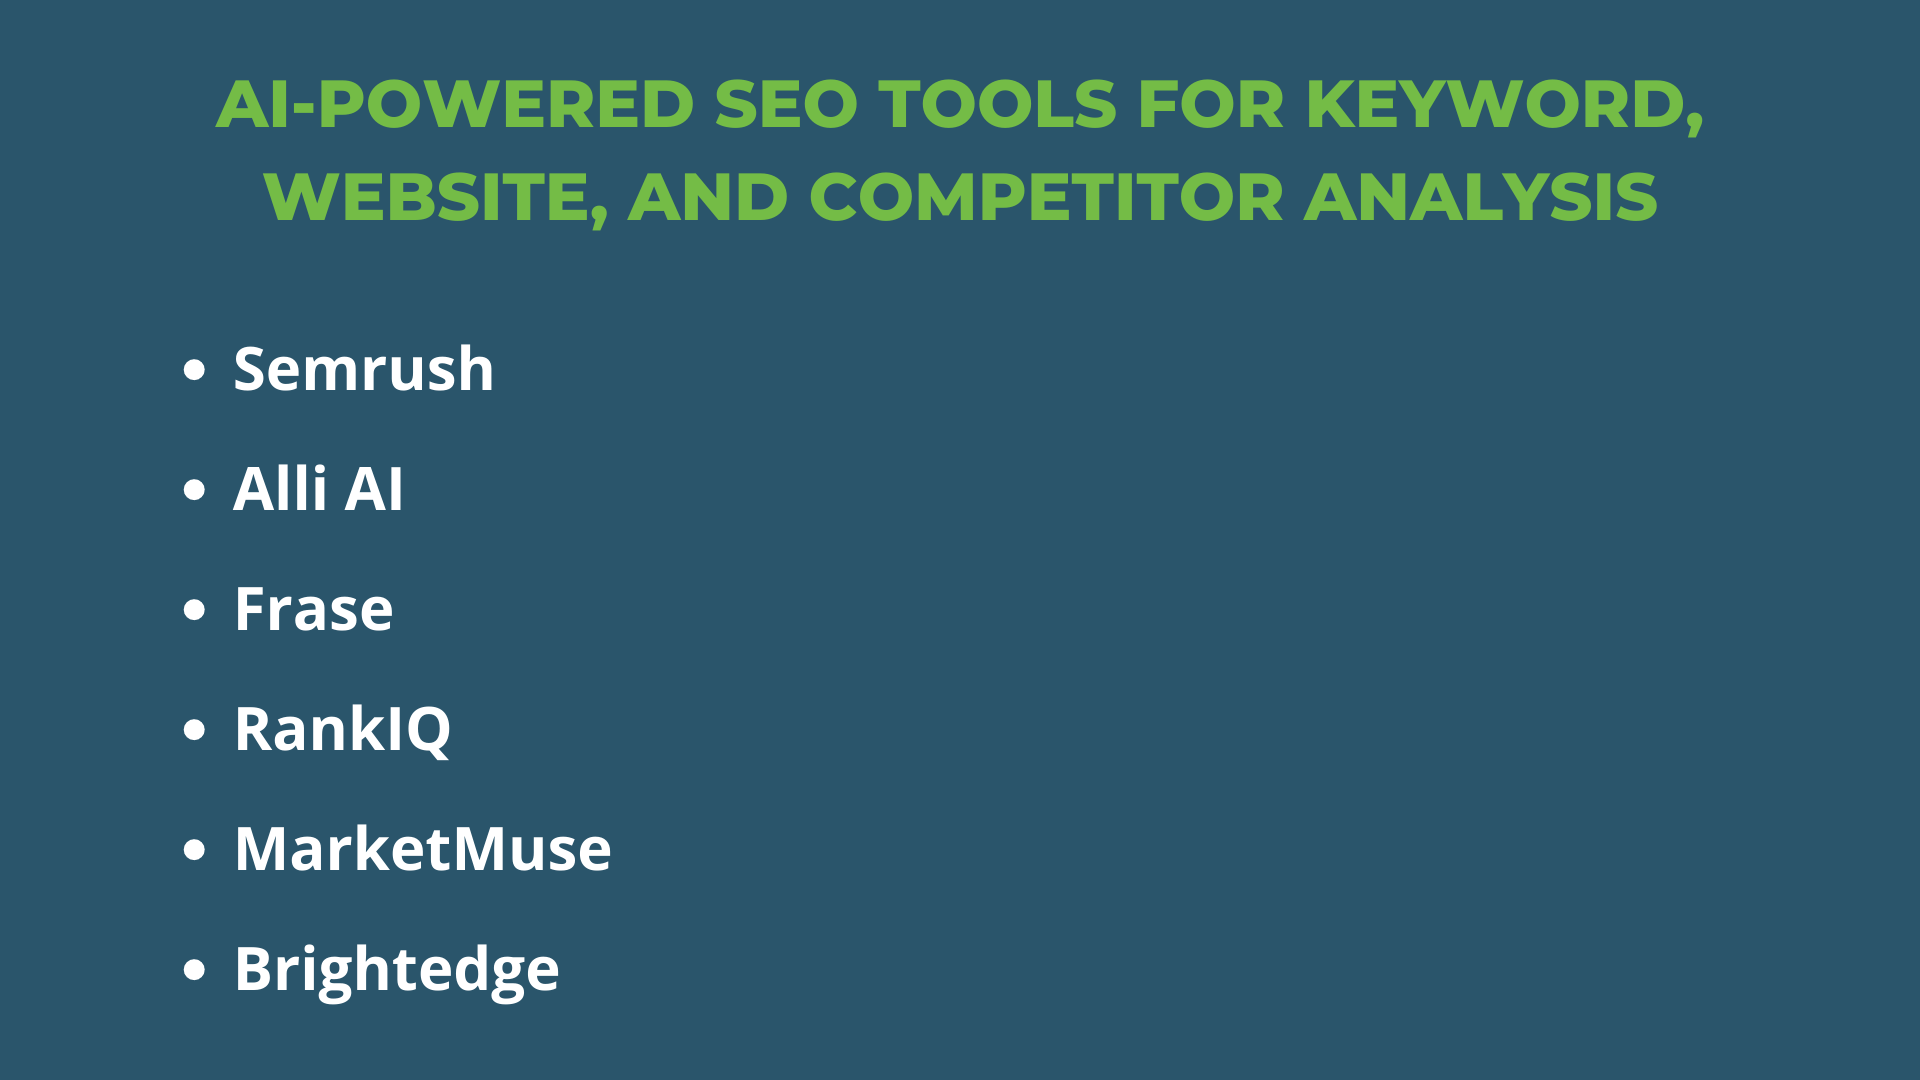 Green-text header and white bullet points of AI-Powered SEO Tools on a navy background